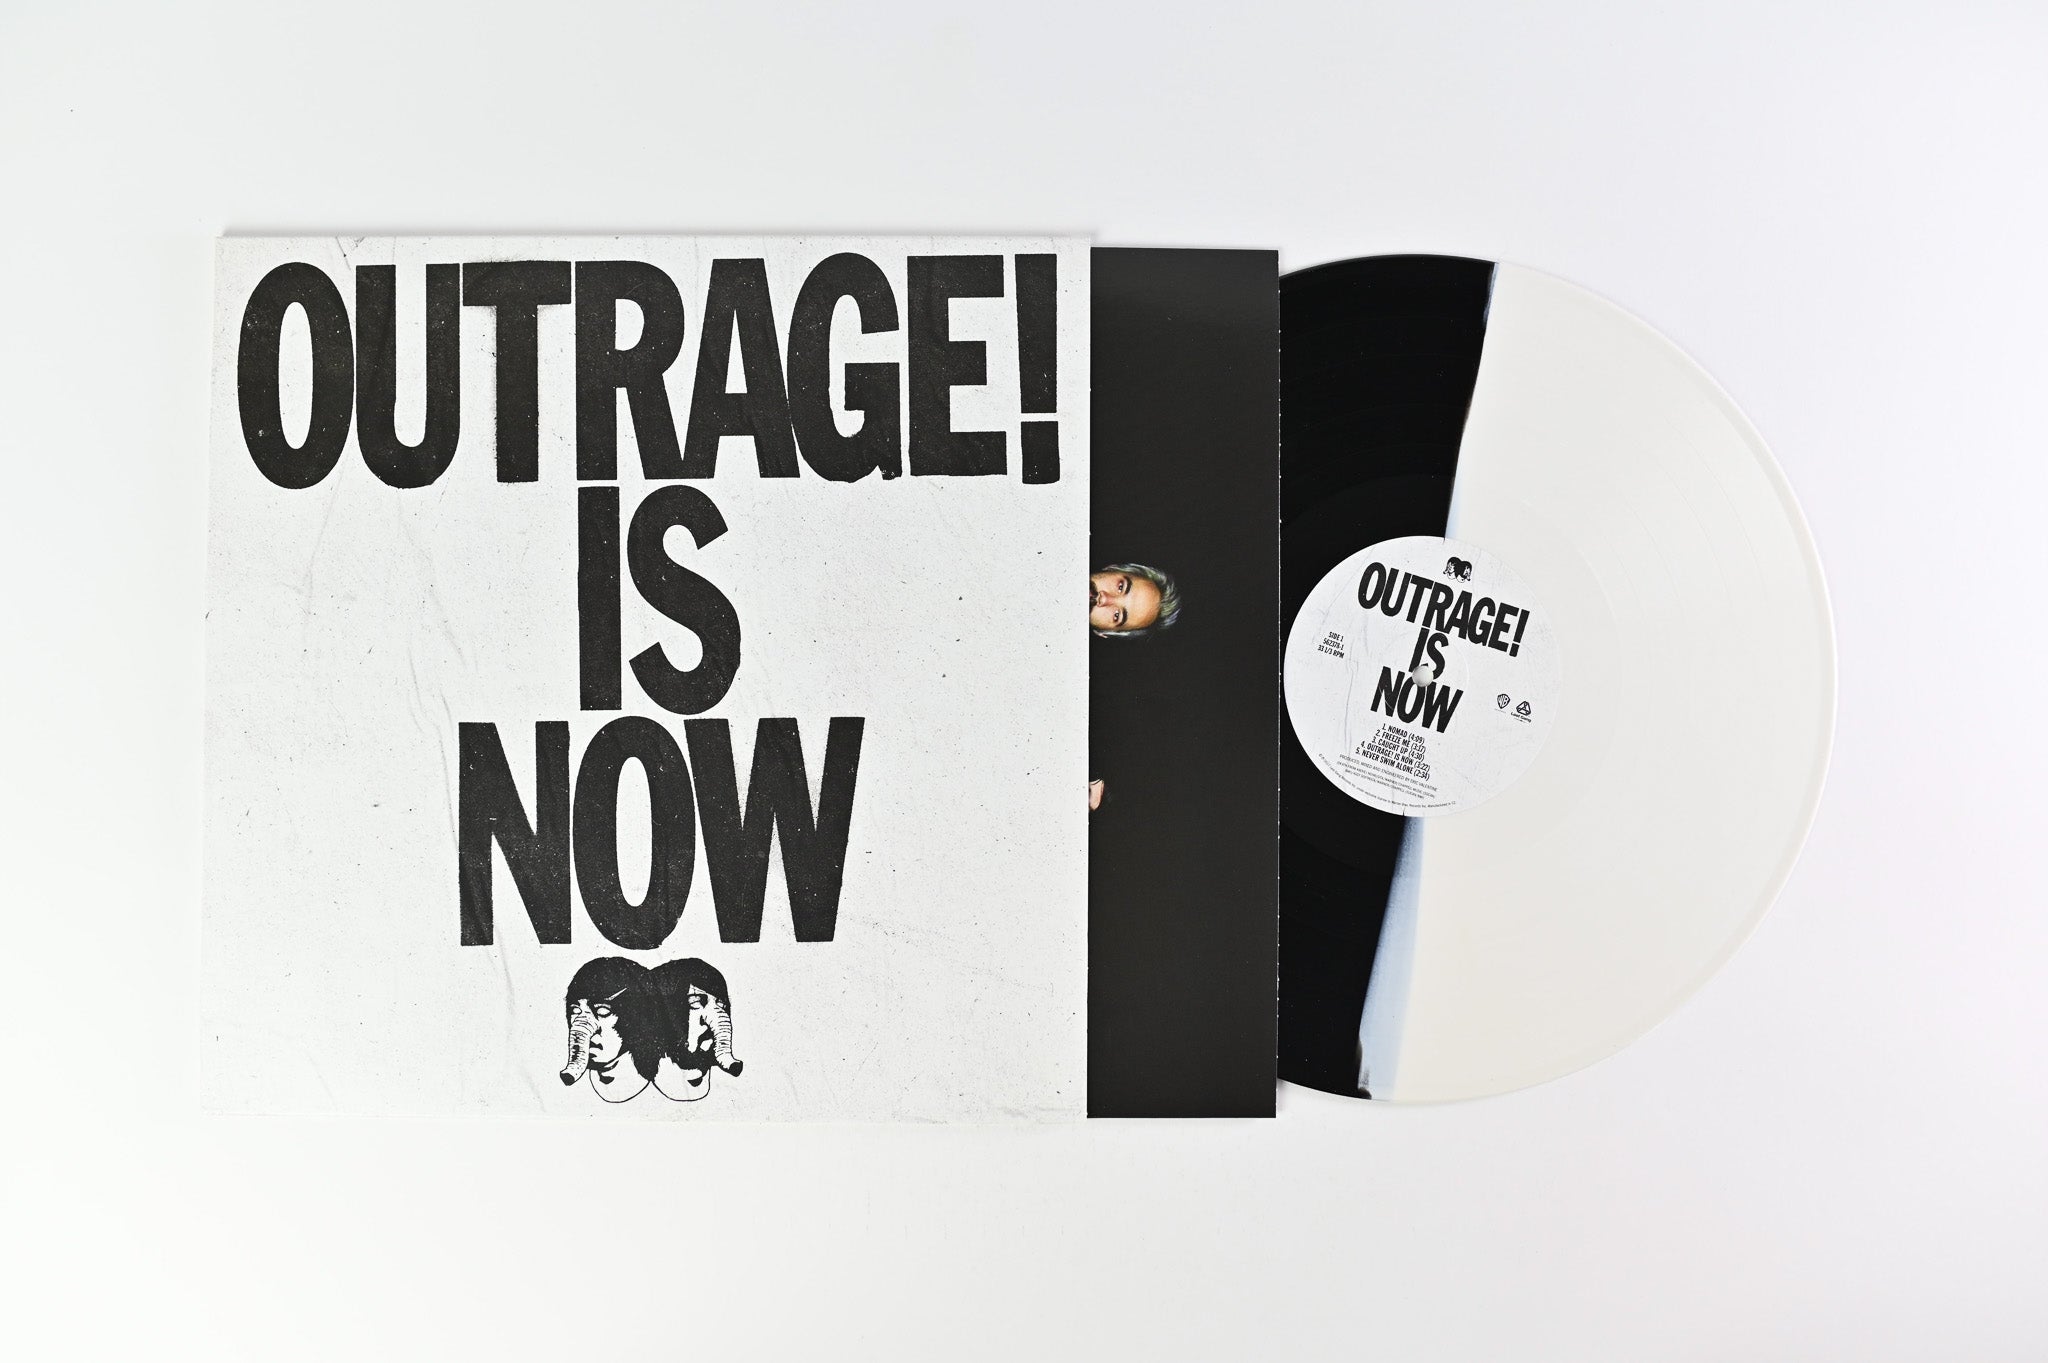 Death From Above 1979 - Outrage! Is Now on Warner Ltd White/Black Split